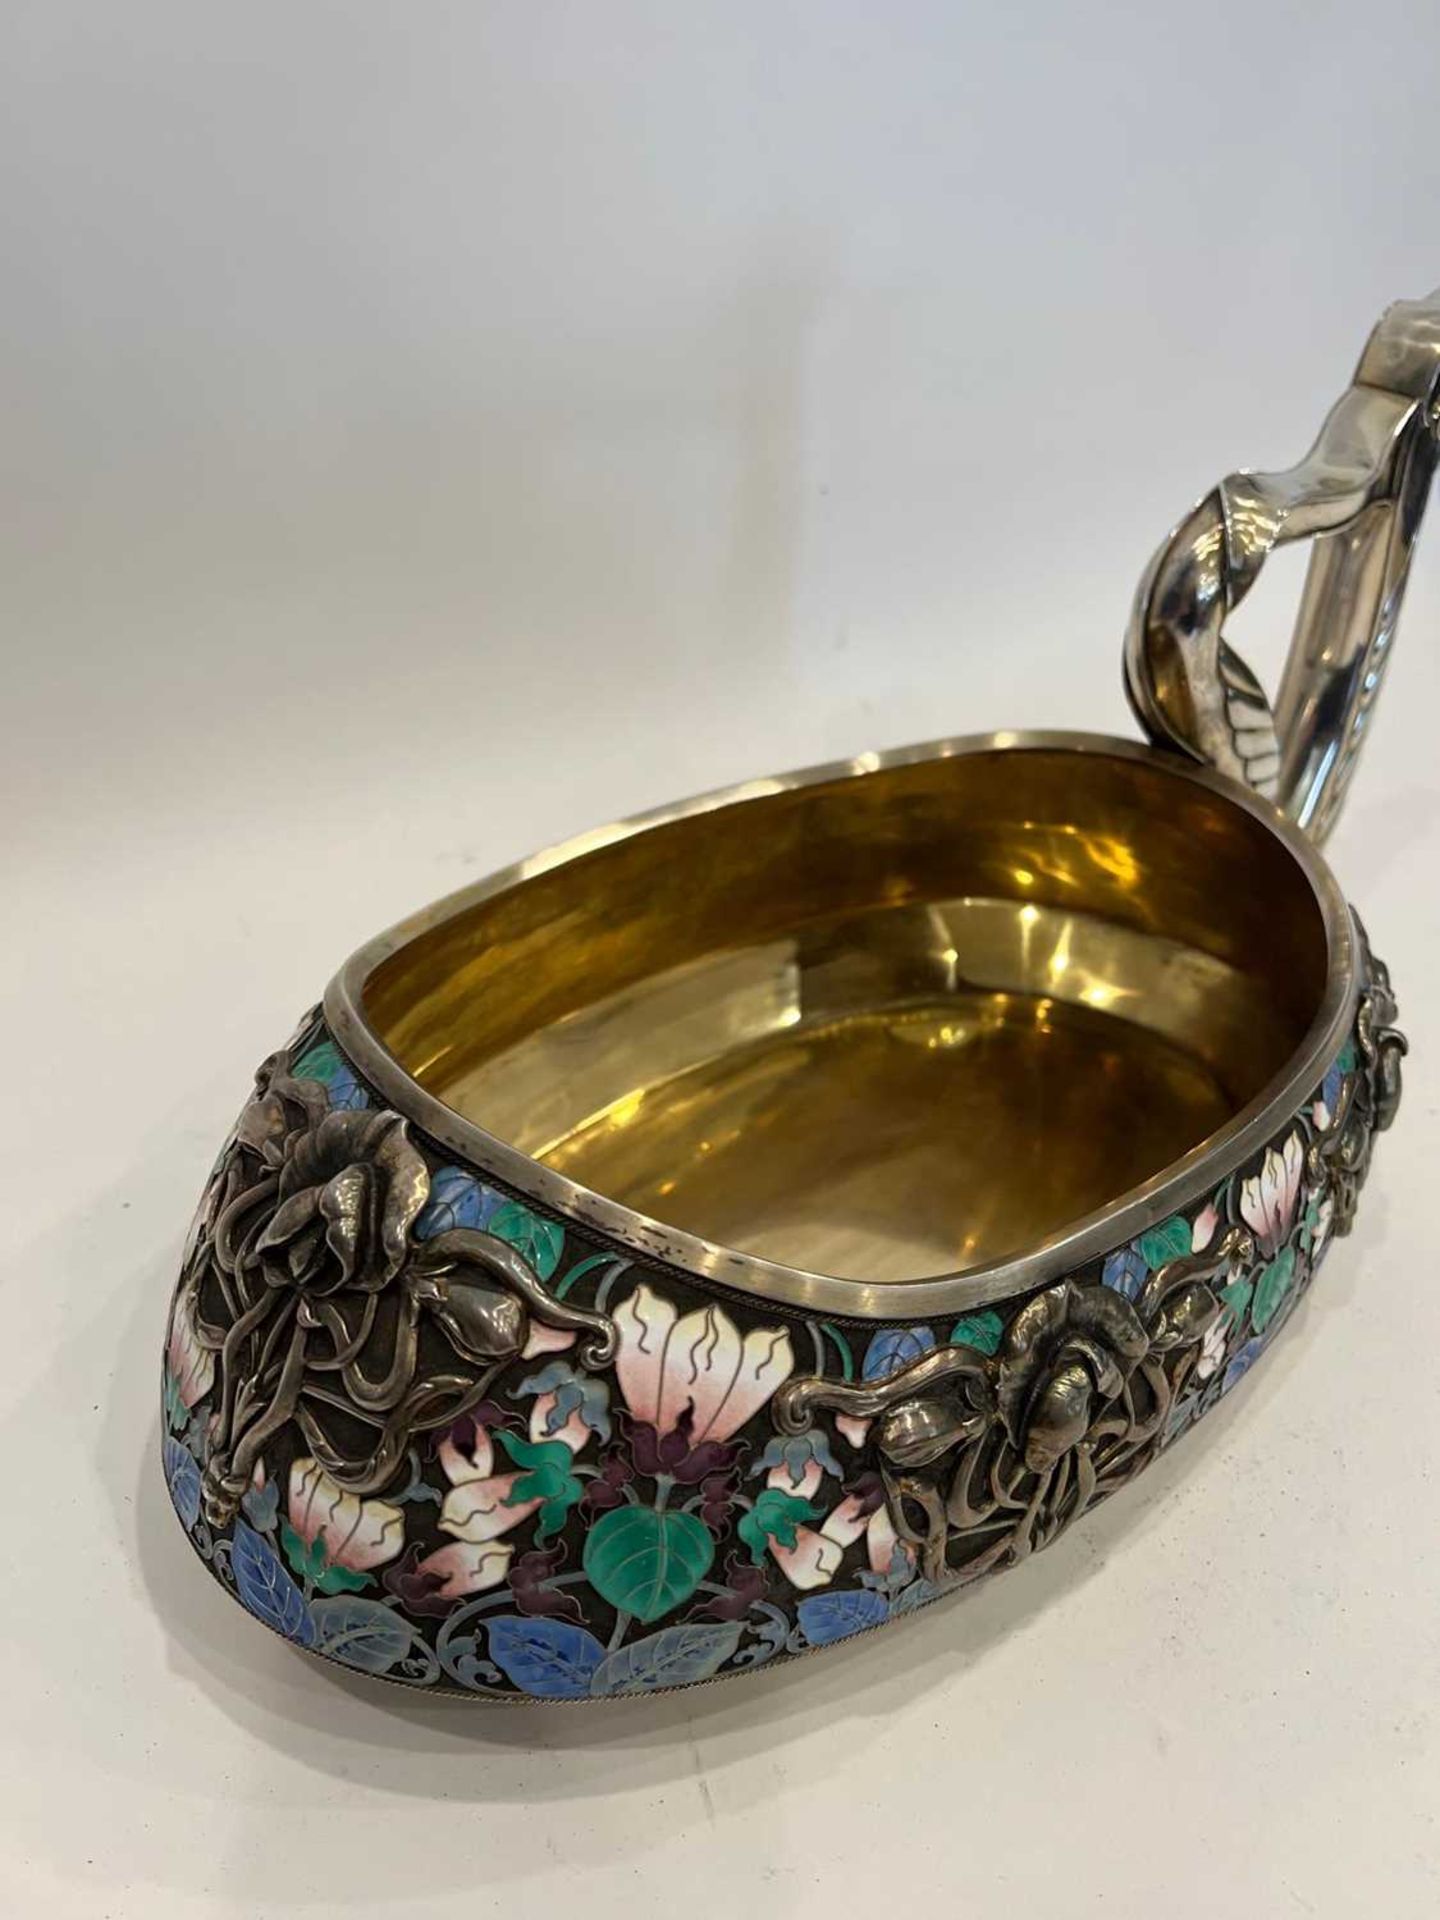 A MASSIVE EARLY 20TH CENTURY RUSSIAN SILVER AND ENAMEL KOVSH IN THE FORM OF A SWAN - Image 26 of 28